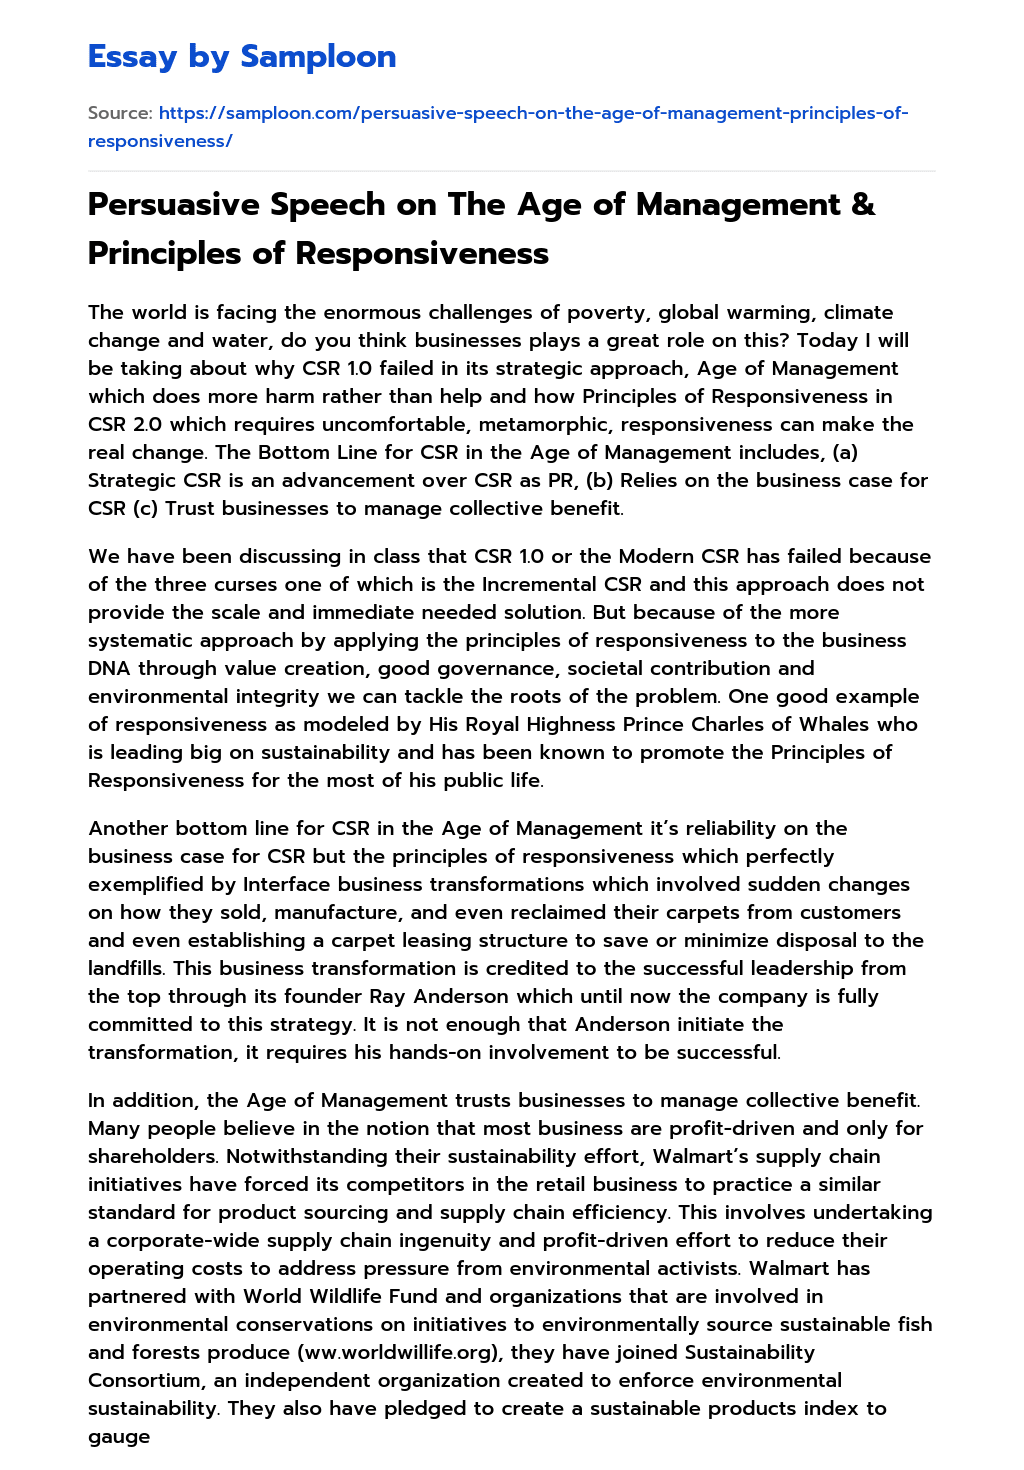 Persuasive Speech on The Age of Management & Principles of Responsiveness essay